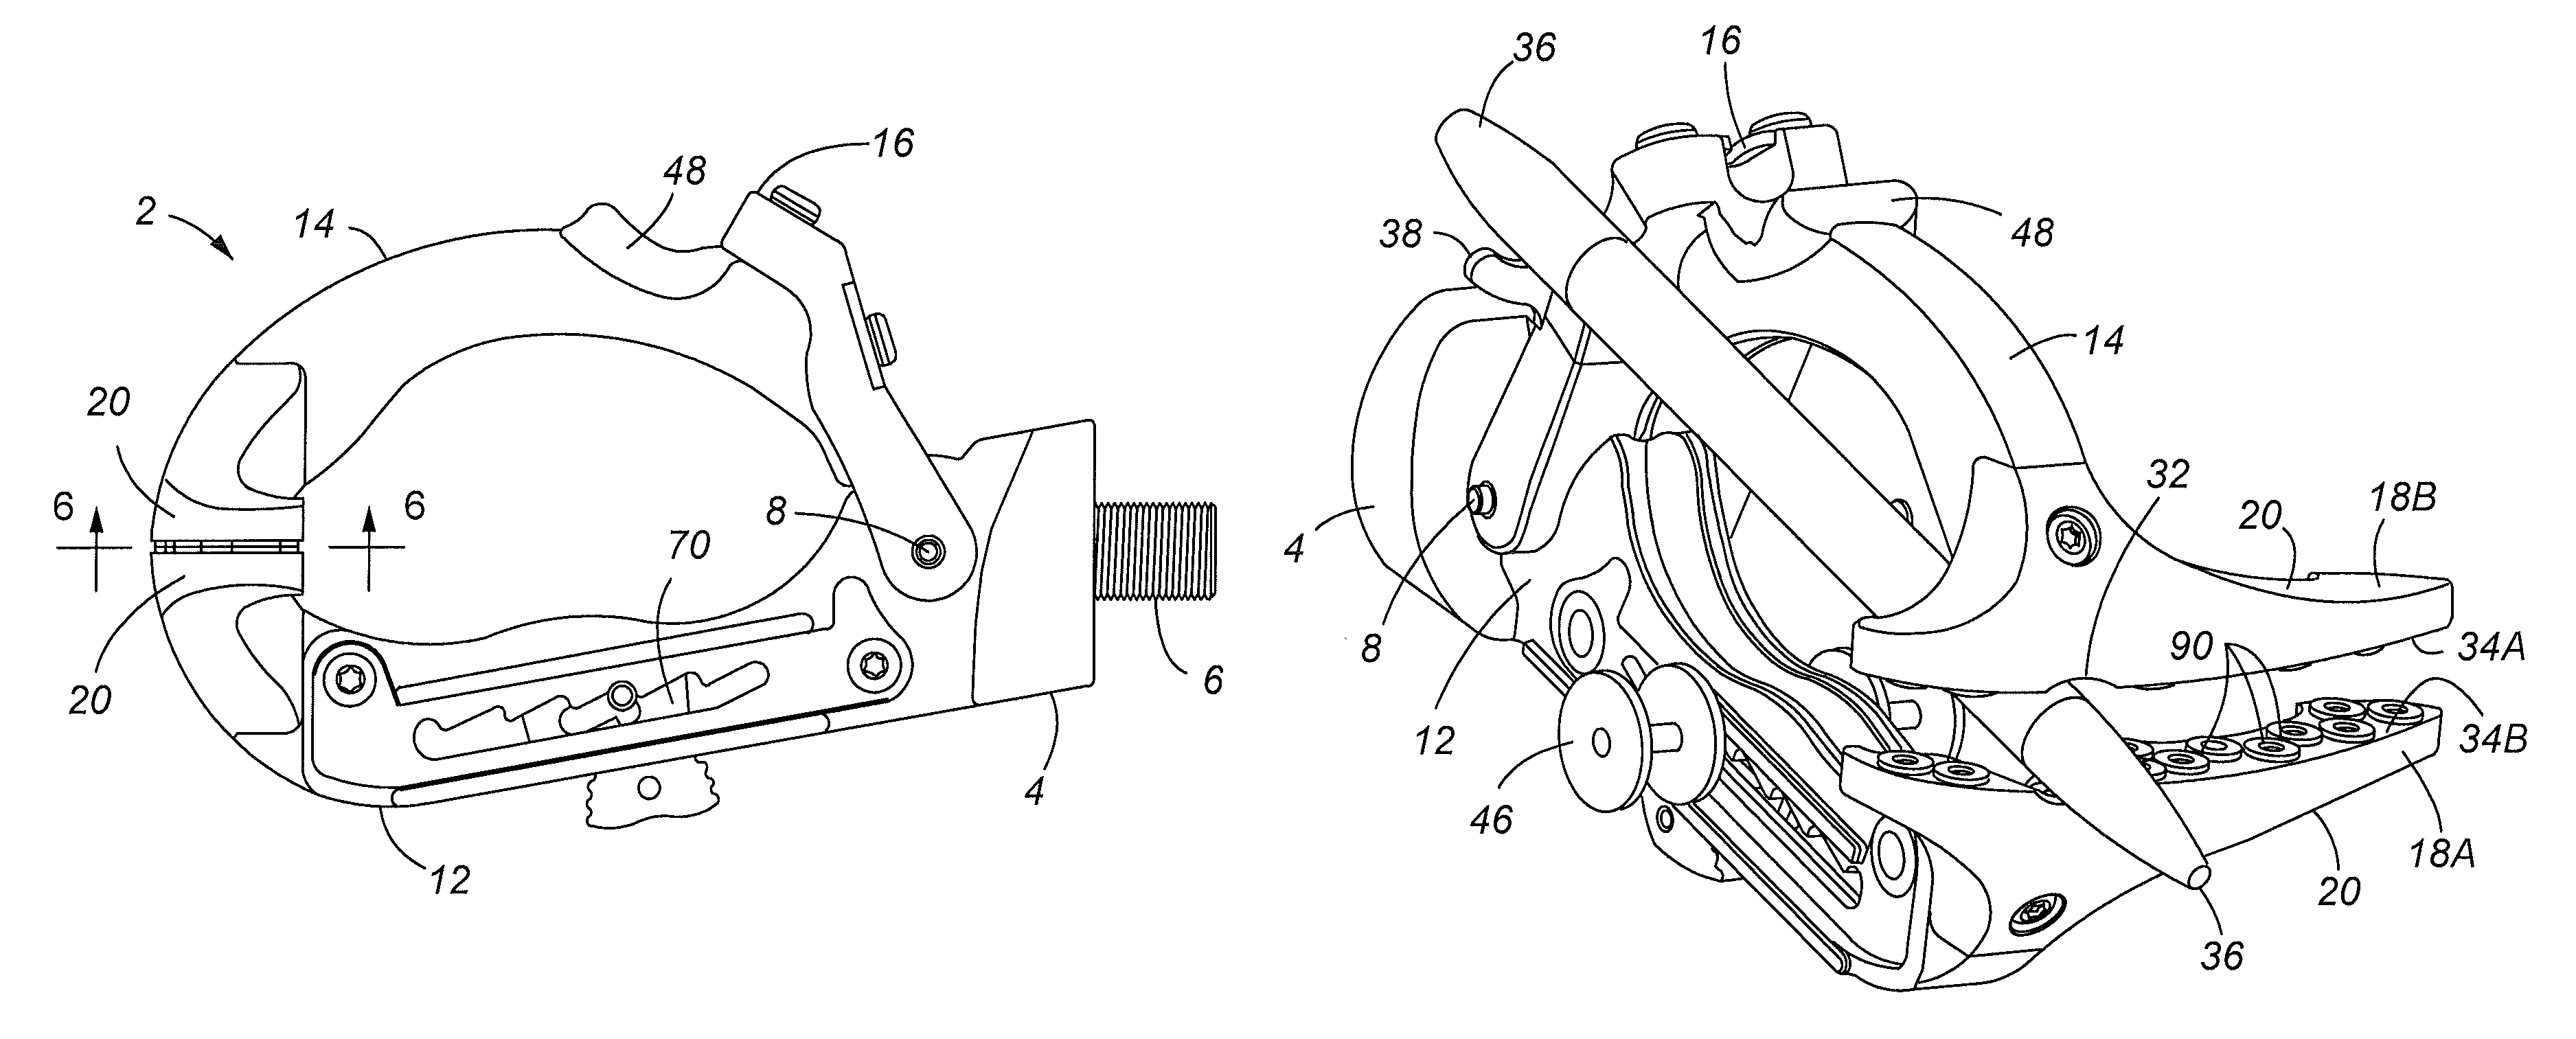 Prosthetic split hook terminal device with adjustable pinch force, functional grasping contours and illumination